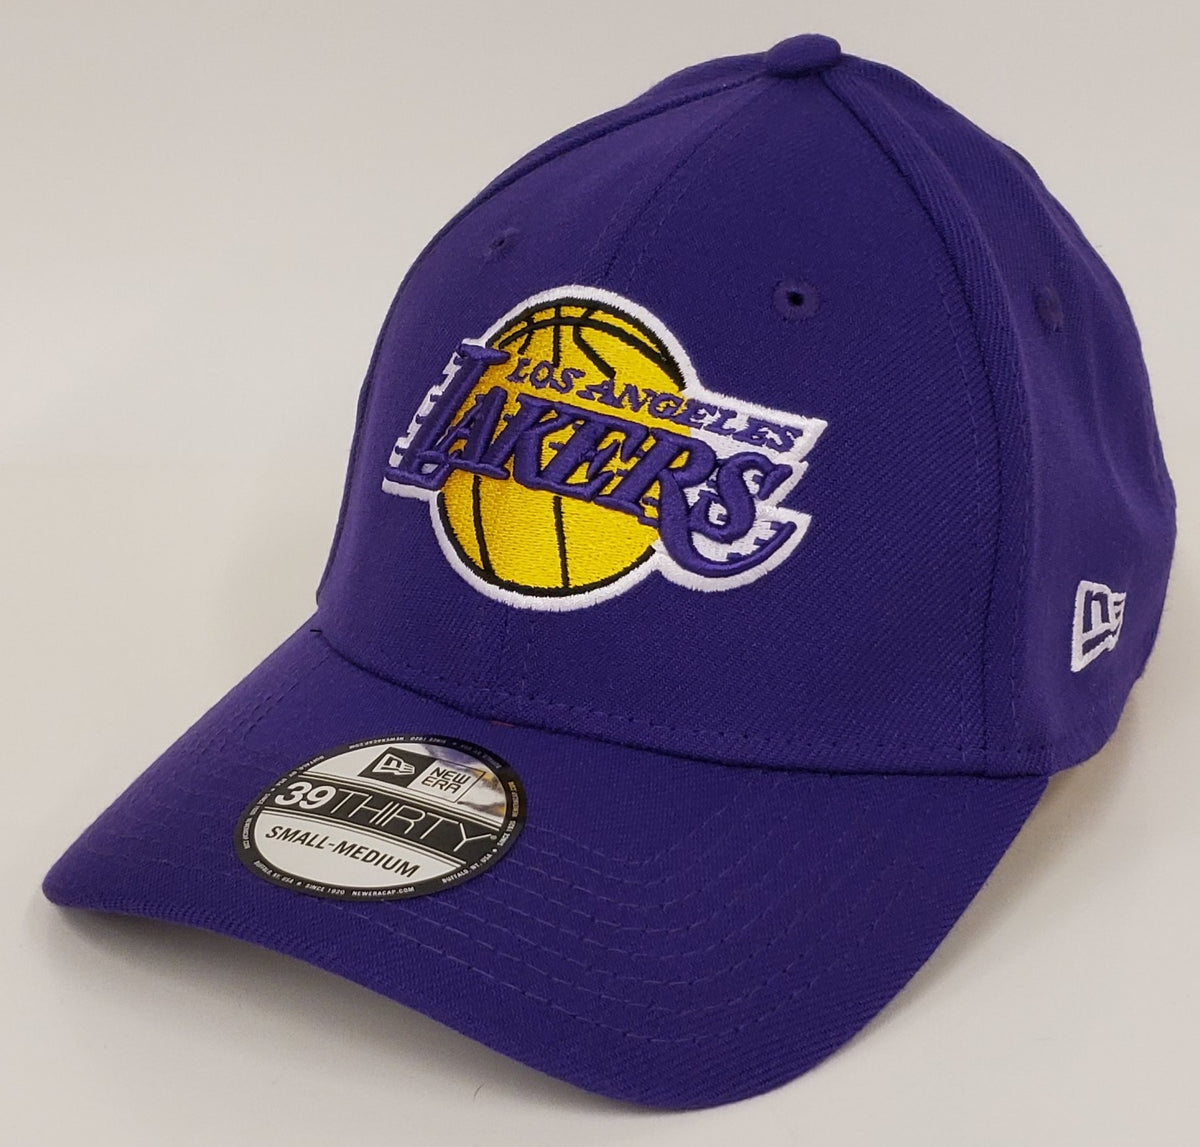 Los Angeles Dodgers / Lakers Flexfit Classic Fitted Hat 